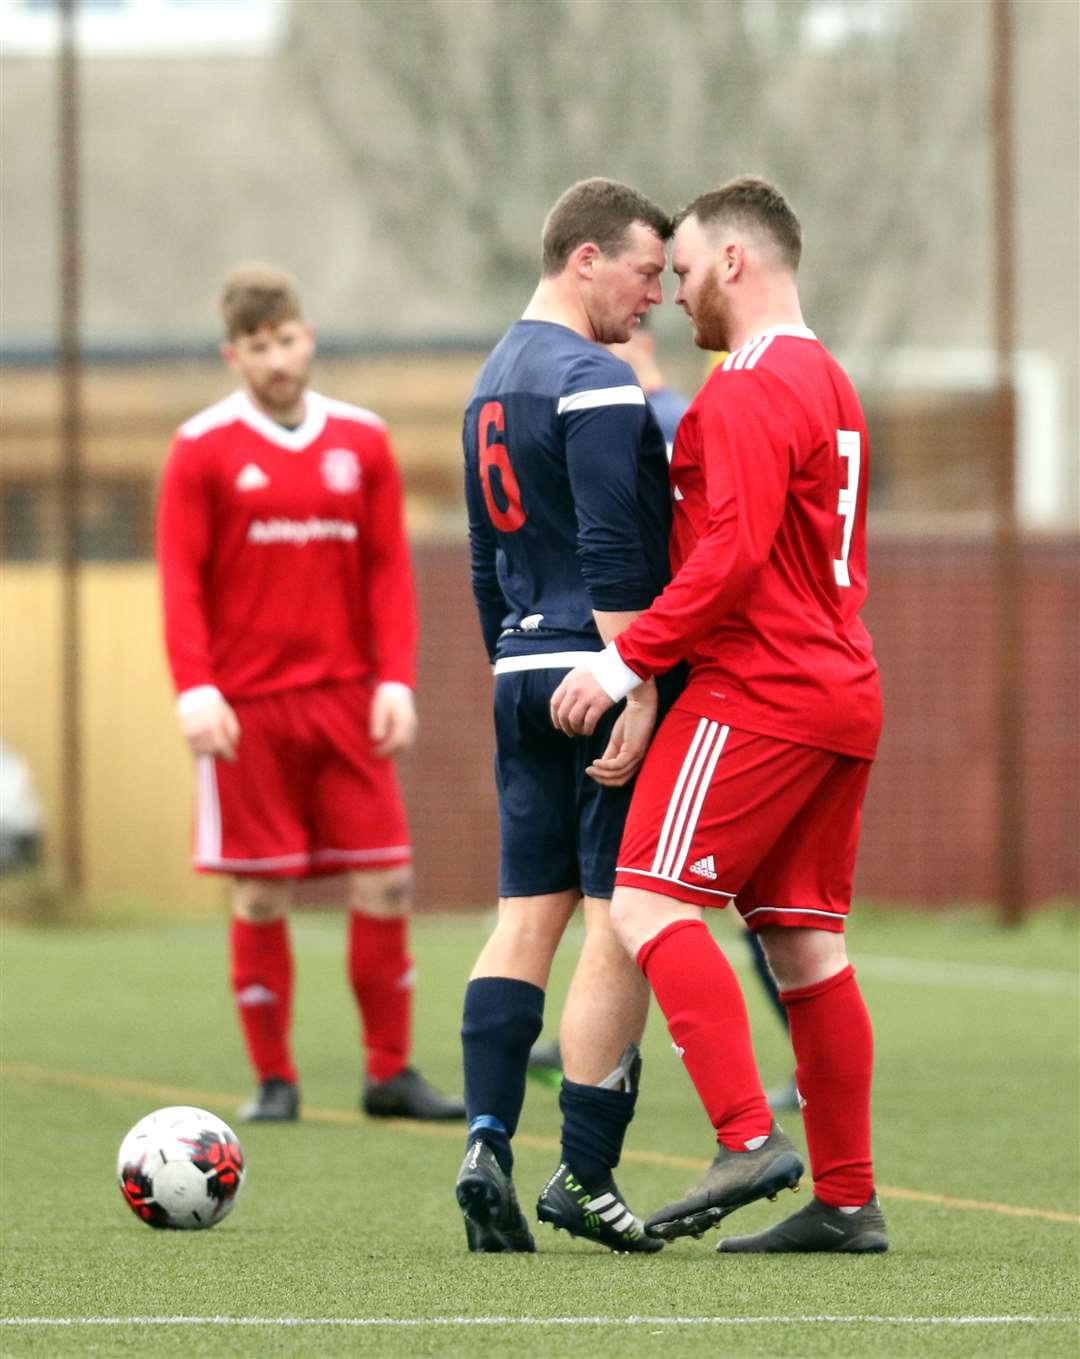 Thurso's James Murray (right) has a 'friendly chat' with Jack Maclean of Inverness Athletic. Murray would have the last laugh as his side emerged with a 4-2 victory. Picture: James Gunn